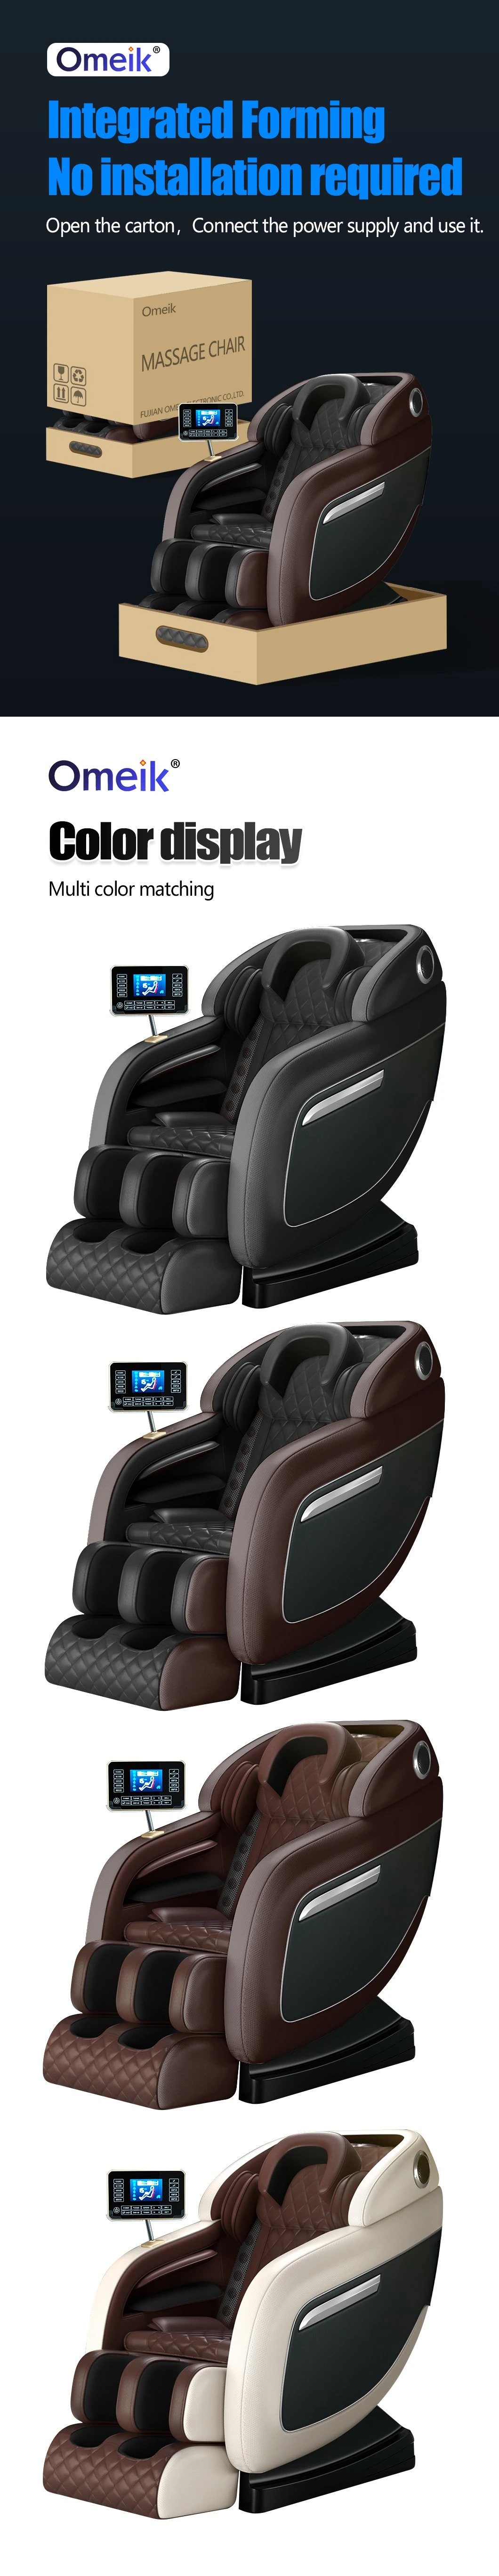 Professional Home Body Real Relax Full Body Air Bags Waist Heating Supper Quality Massage Chair